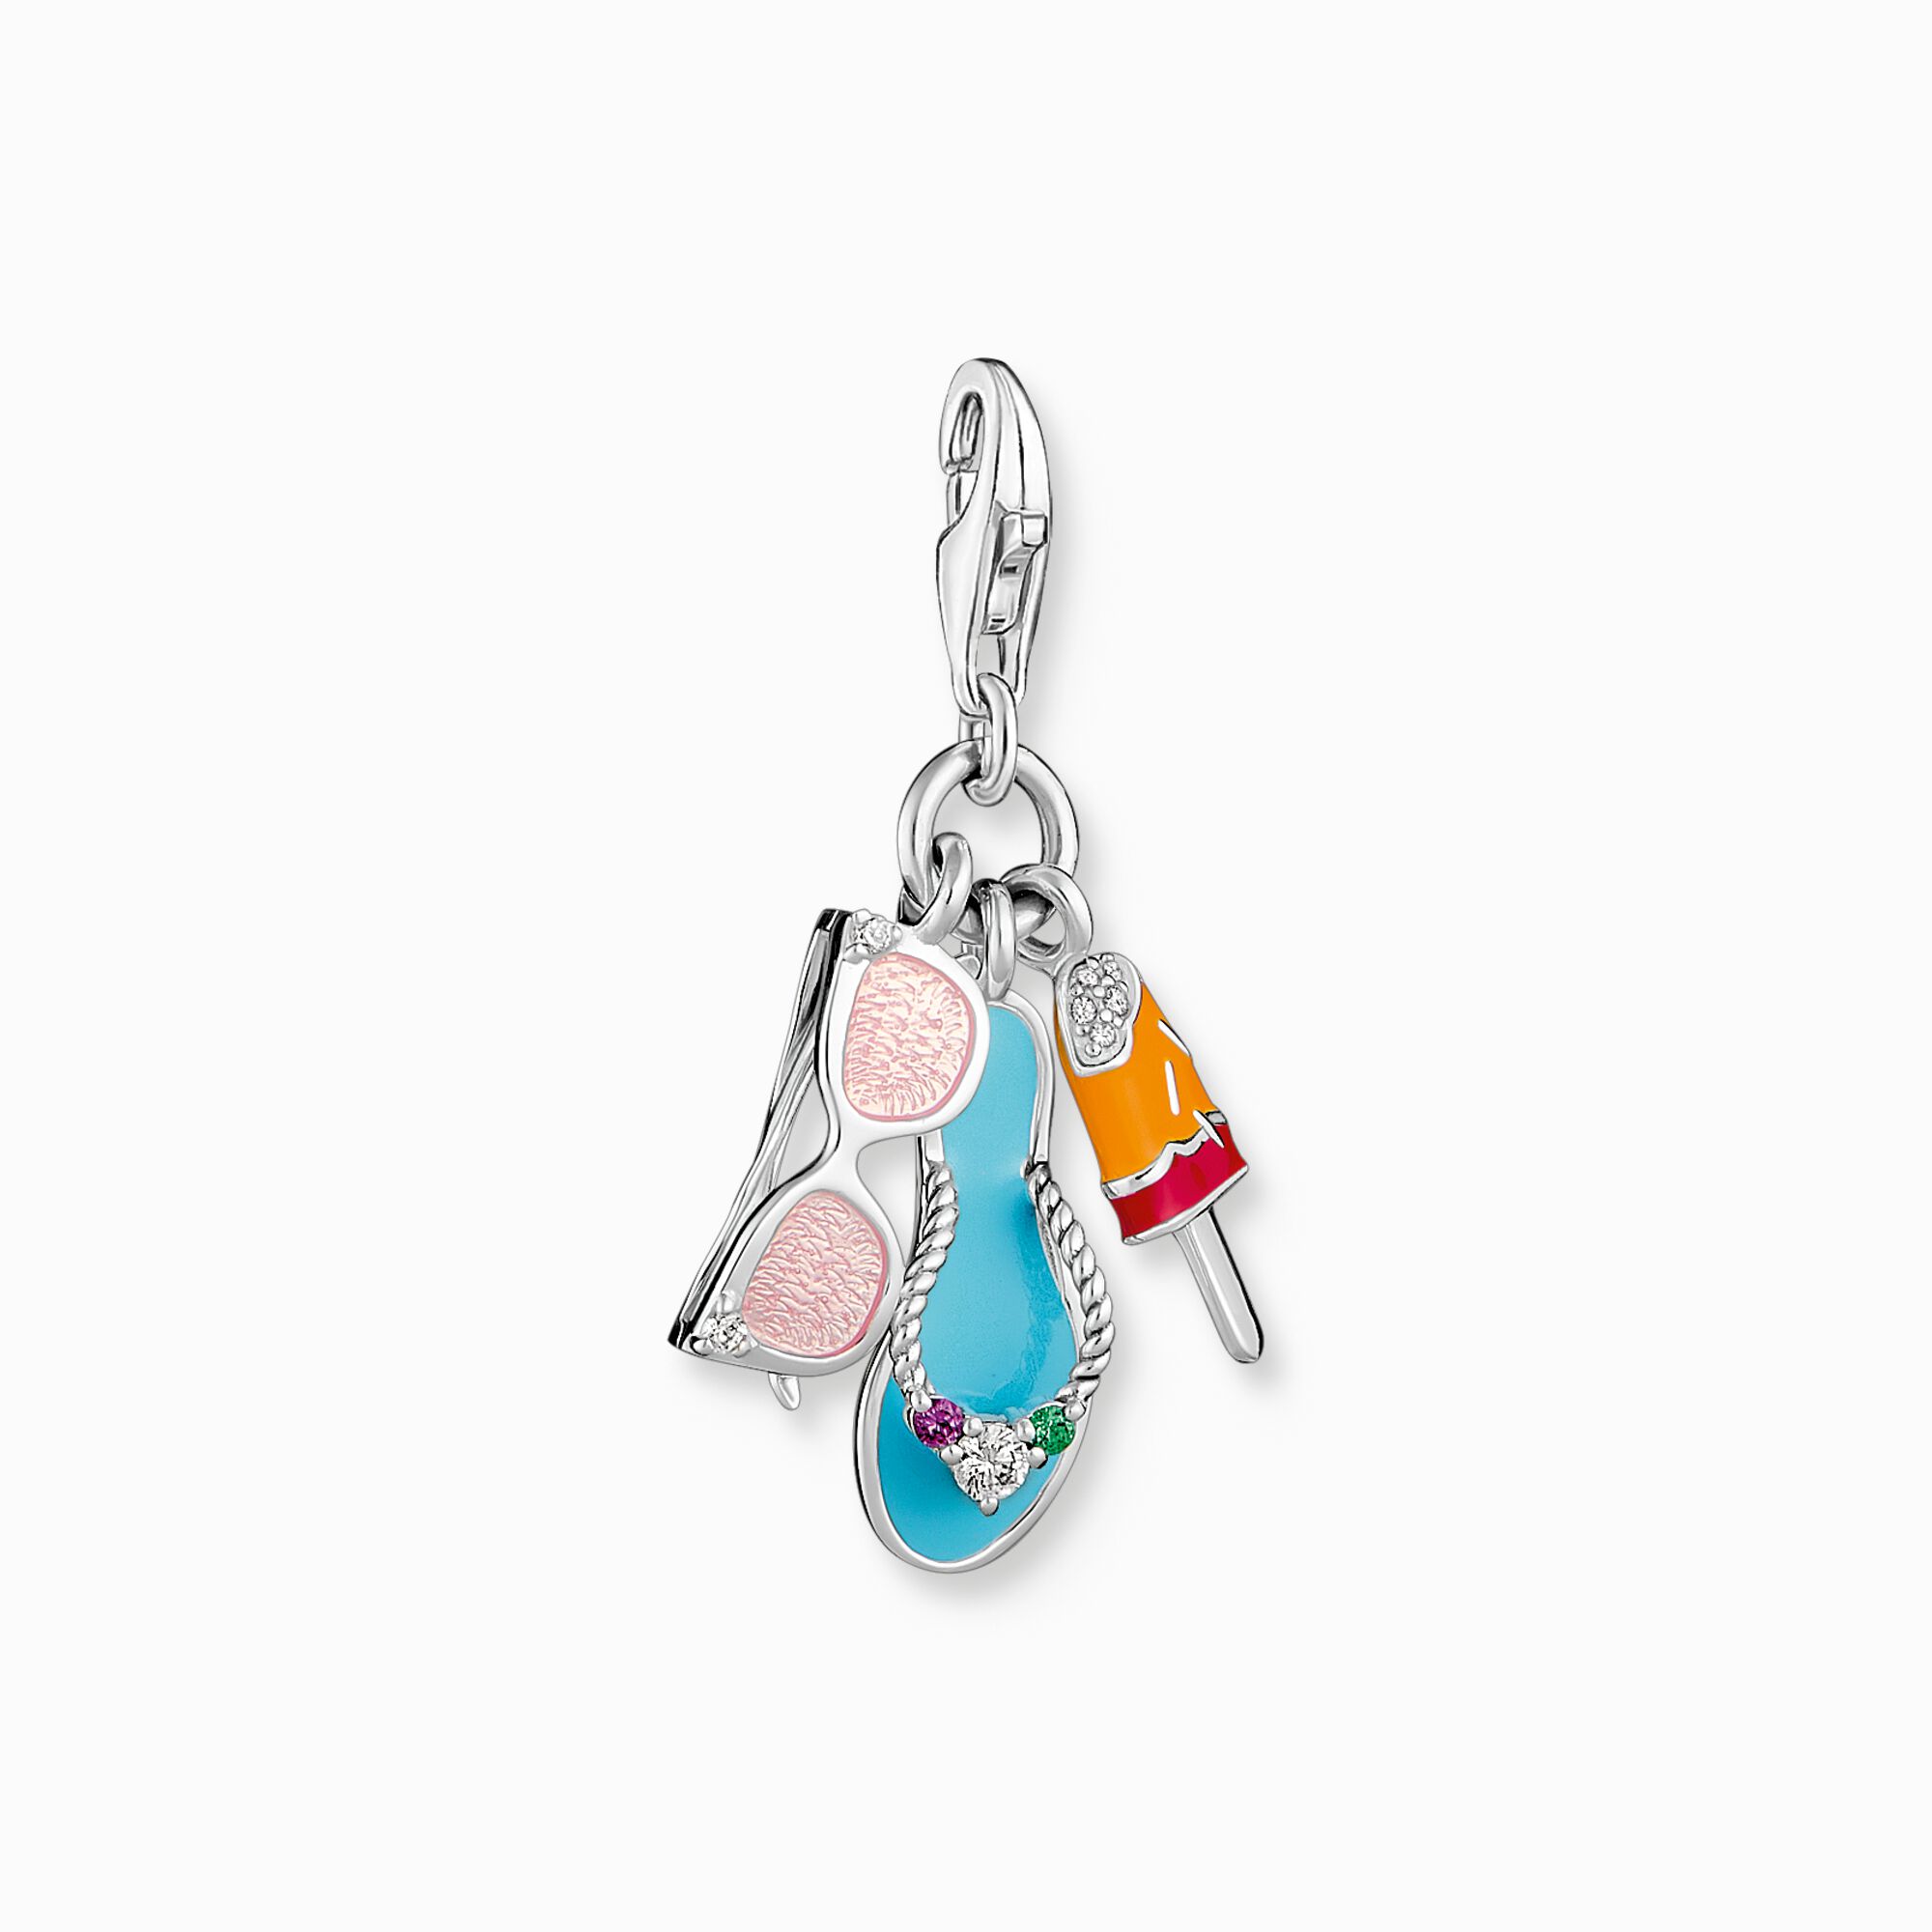 Charm pendant from the Charm Club collection in the THOMAS SABO online store